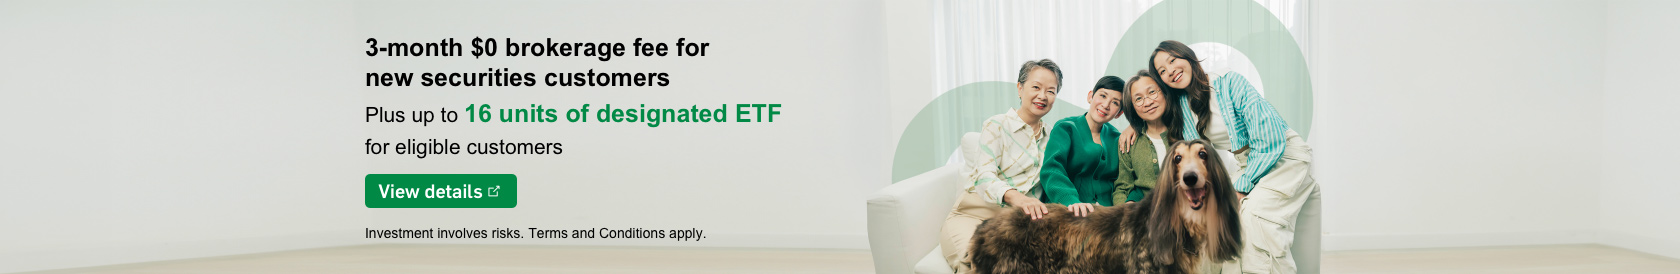 3-month $0 brokerage fee for new securities customers plus up to 16 units of designated ETF for eligible customers